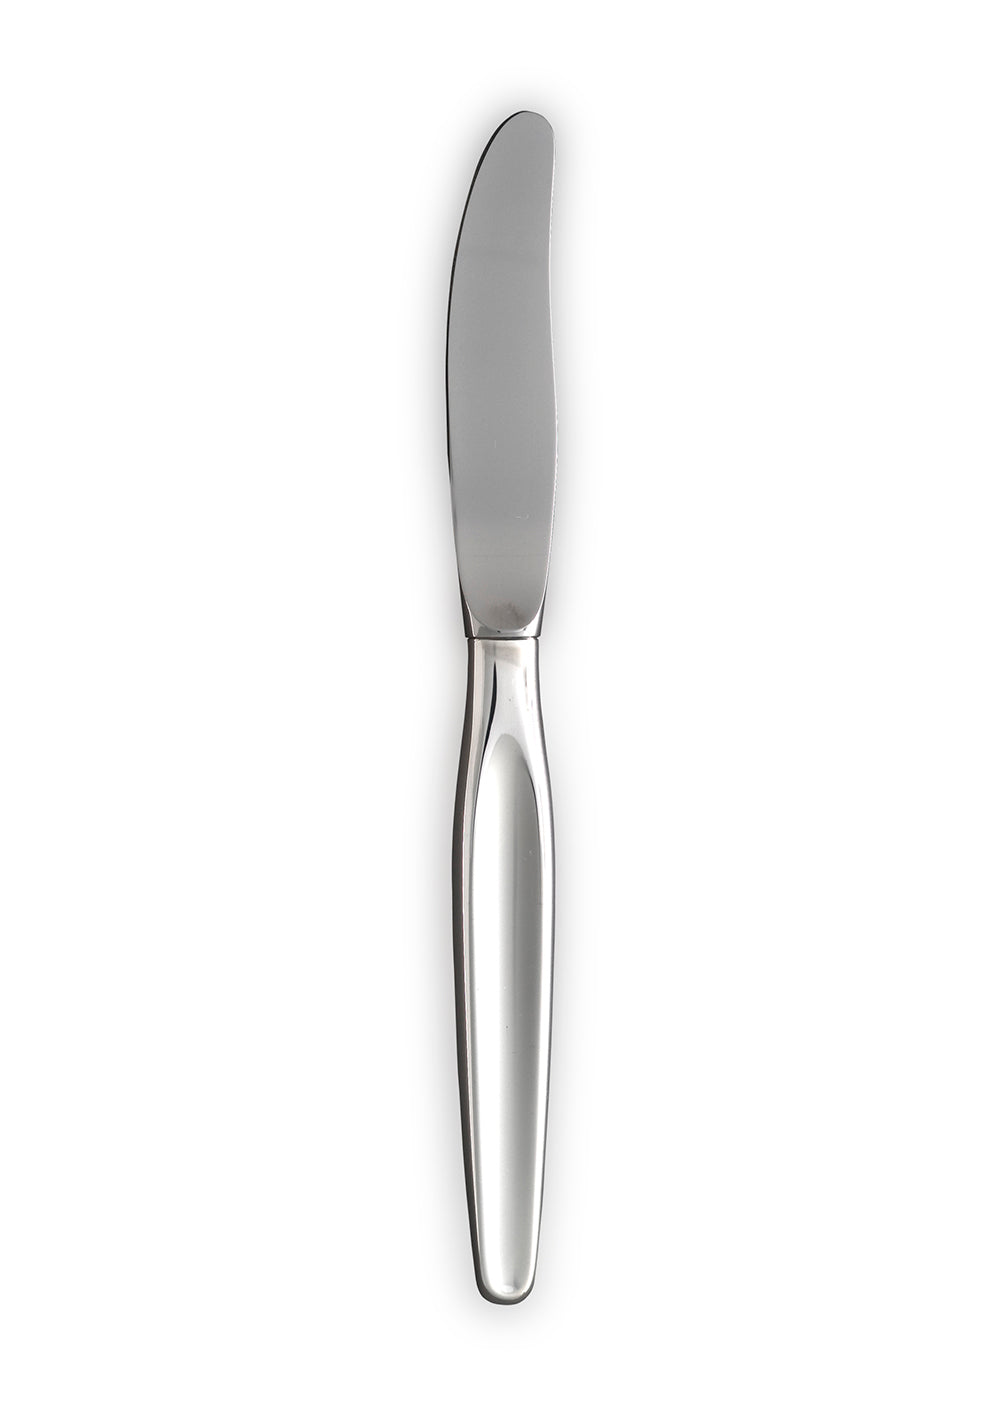 Aase small dining knife with a long handle